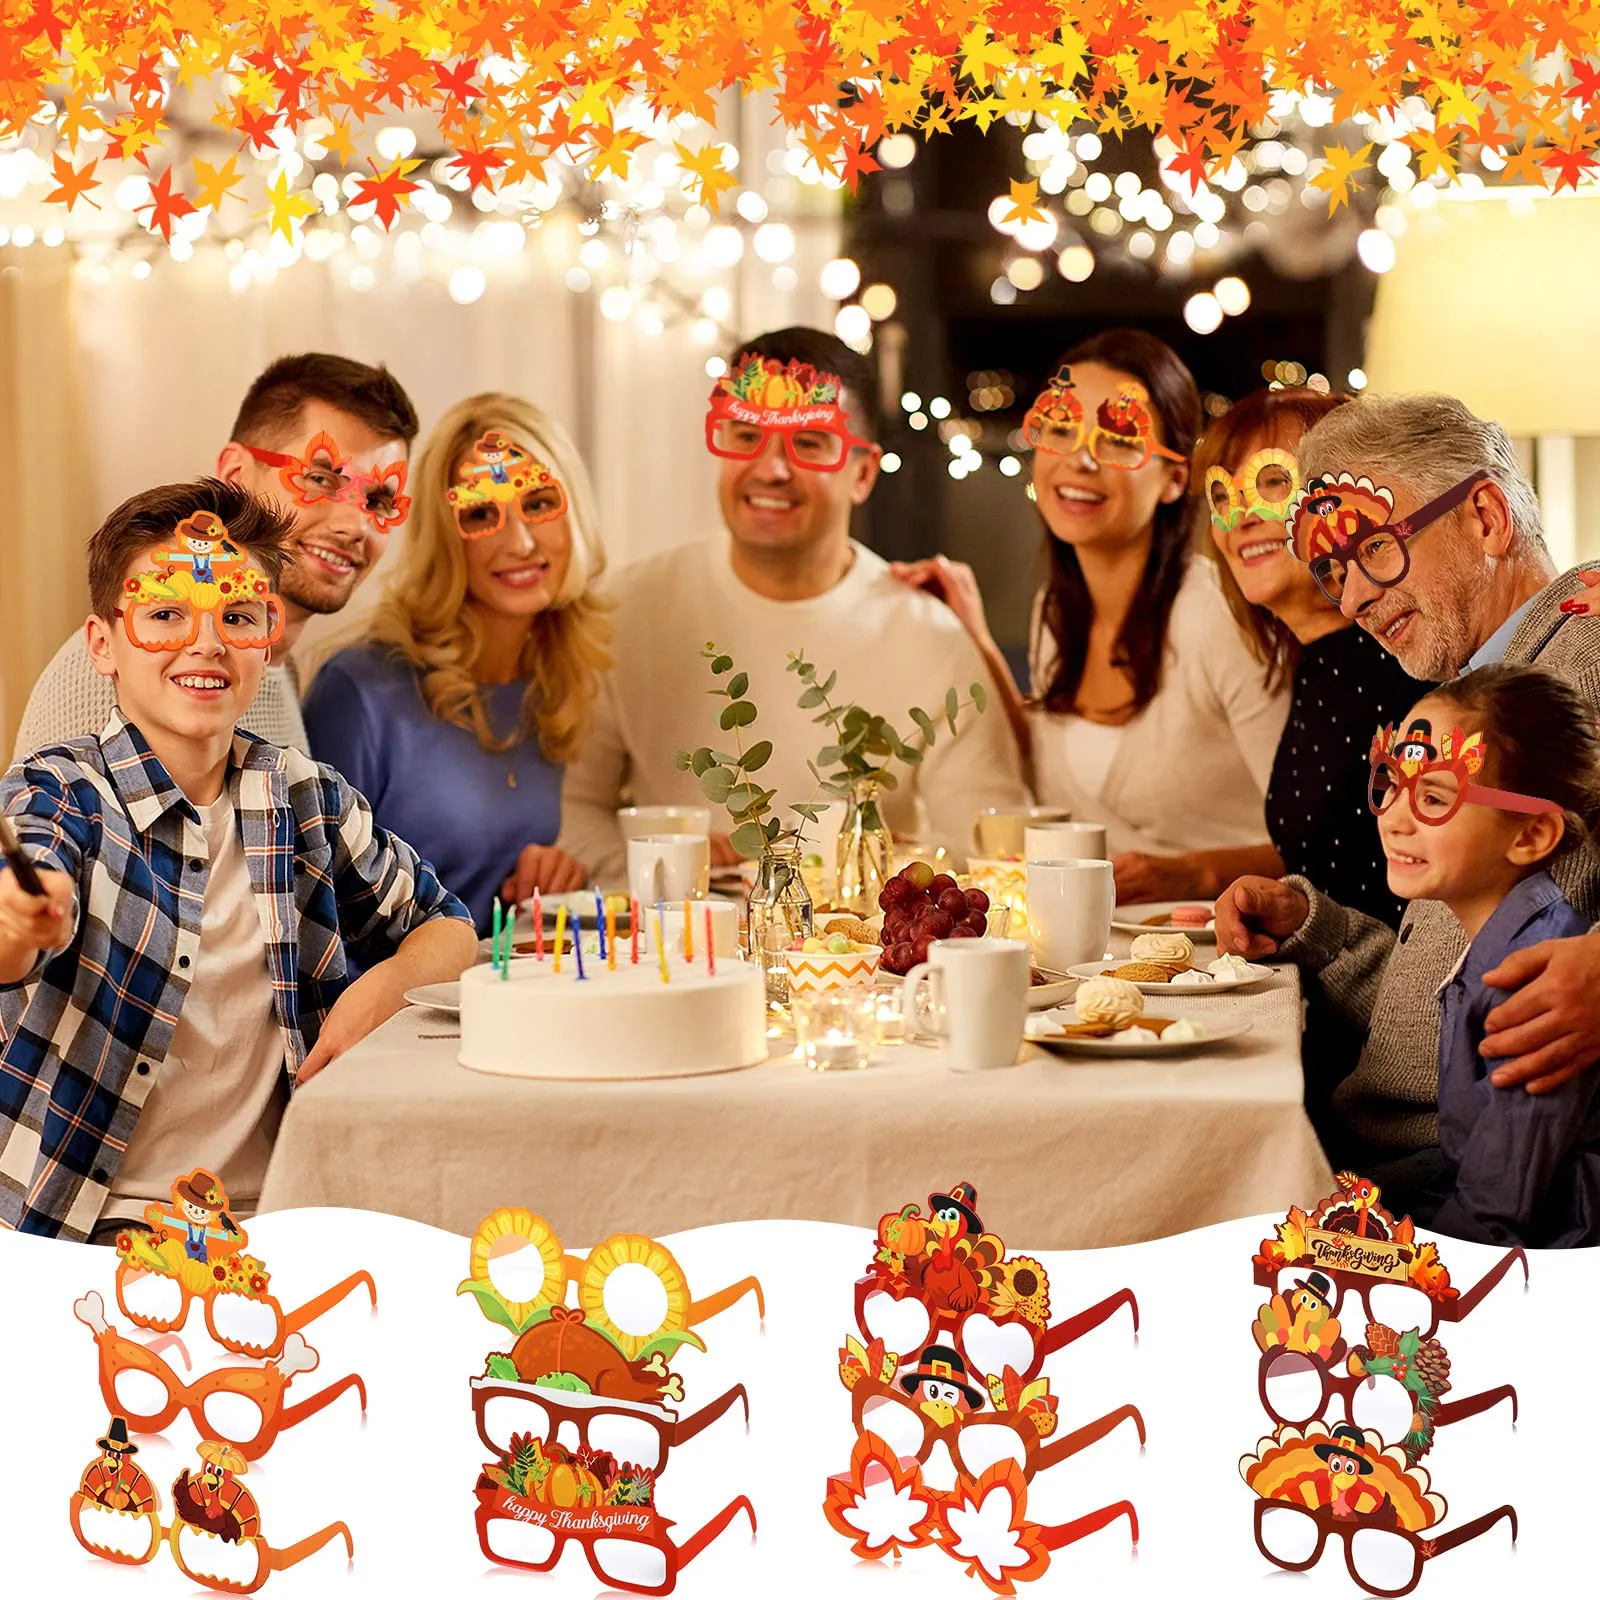 thanksgivings glasses thanksgiving turkey sunglasses pumpkin maple leaf thanksgiving party paper glasses photo prop for kids thanksgiving fall harvest party birthday party favors supplies